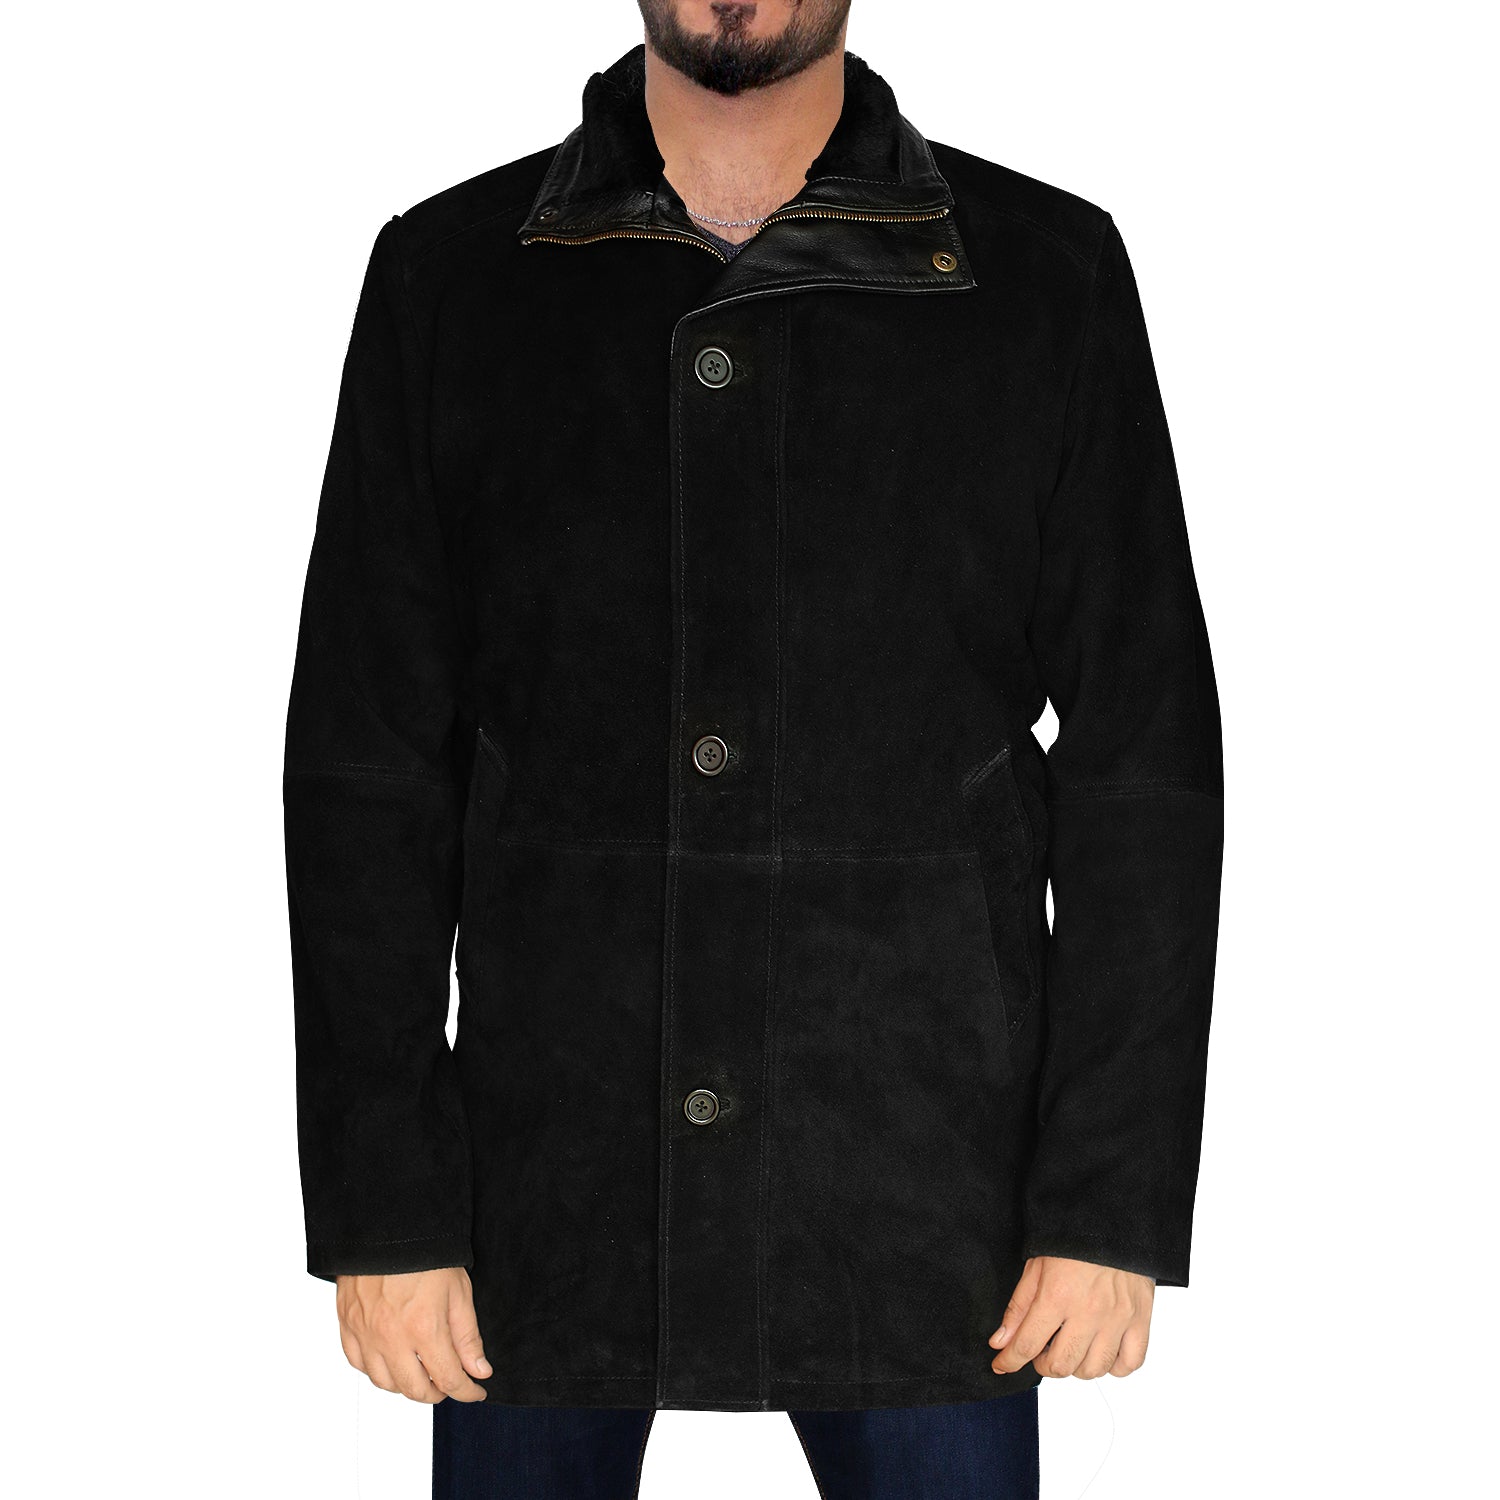 Leather leather coats for men – suede jacket men and long leather coat Black Small